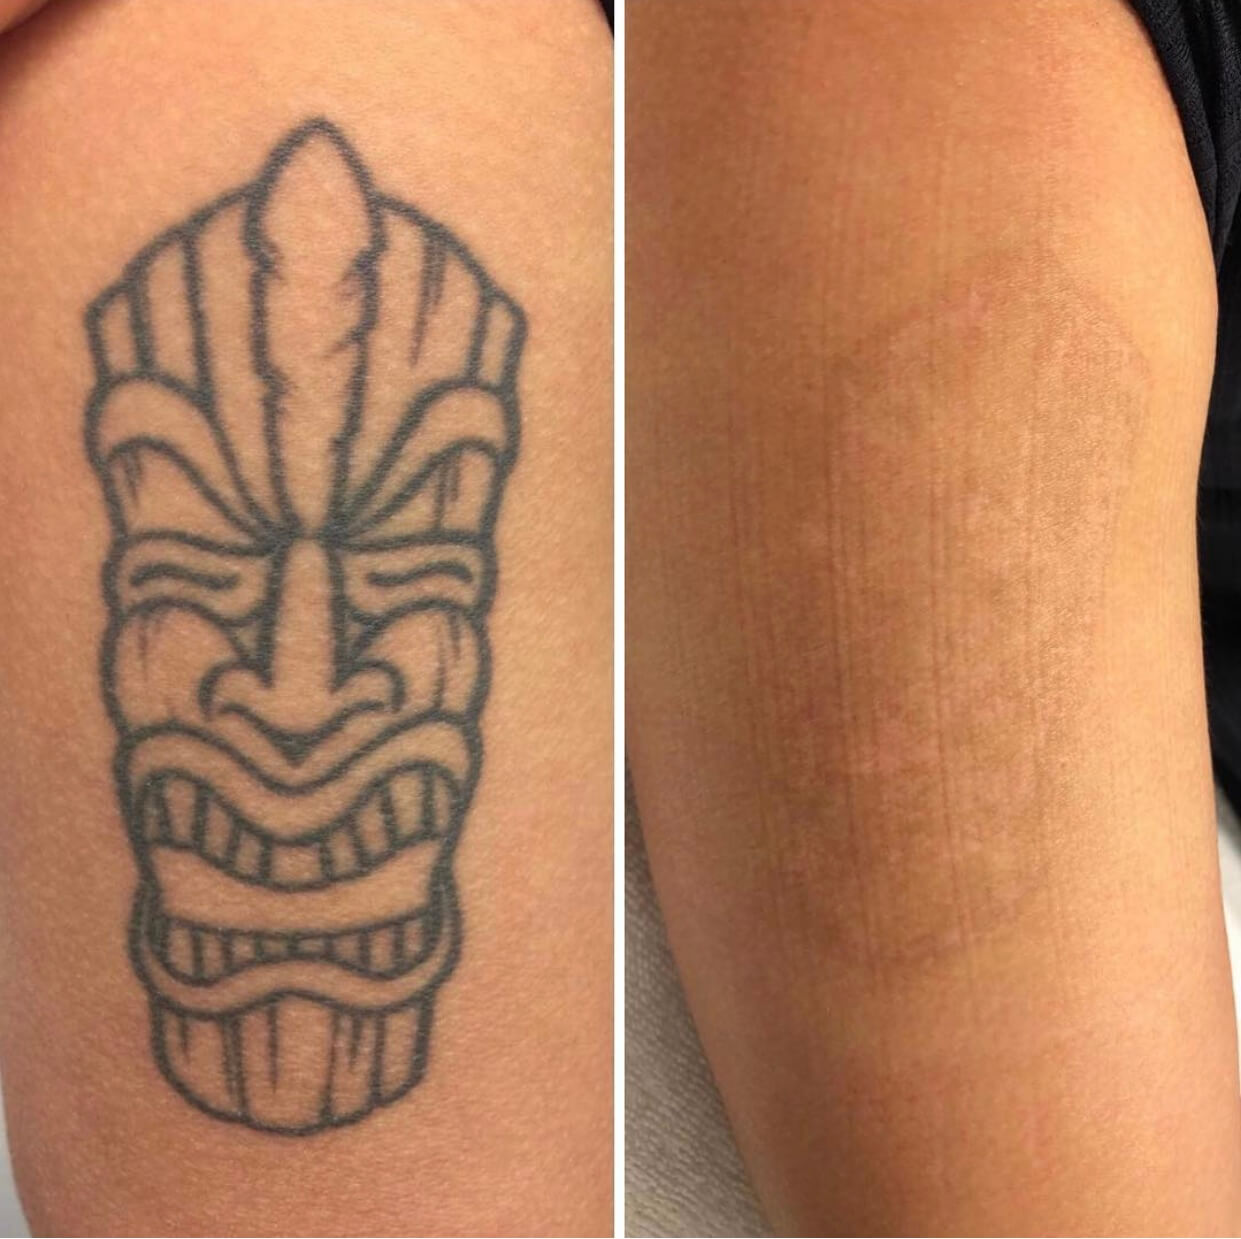 doctor chantes tattoo removal